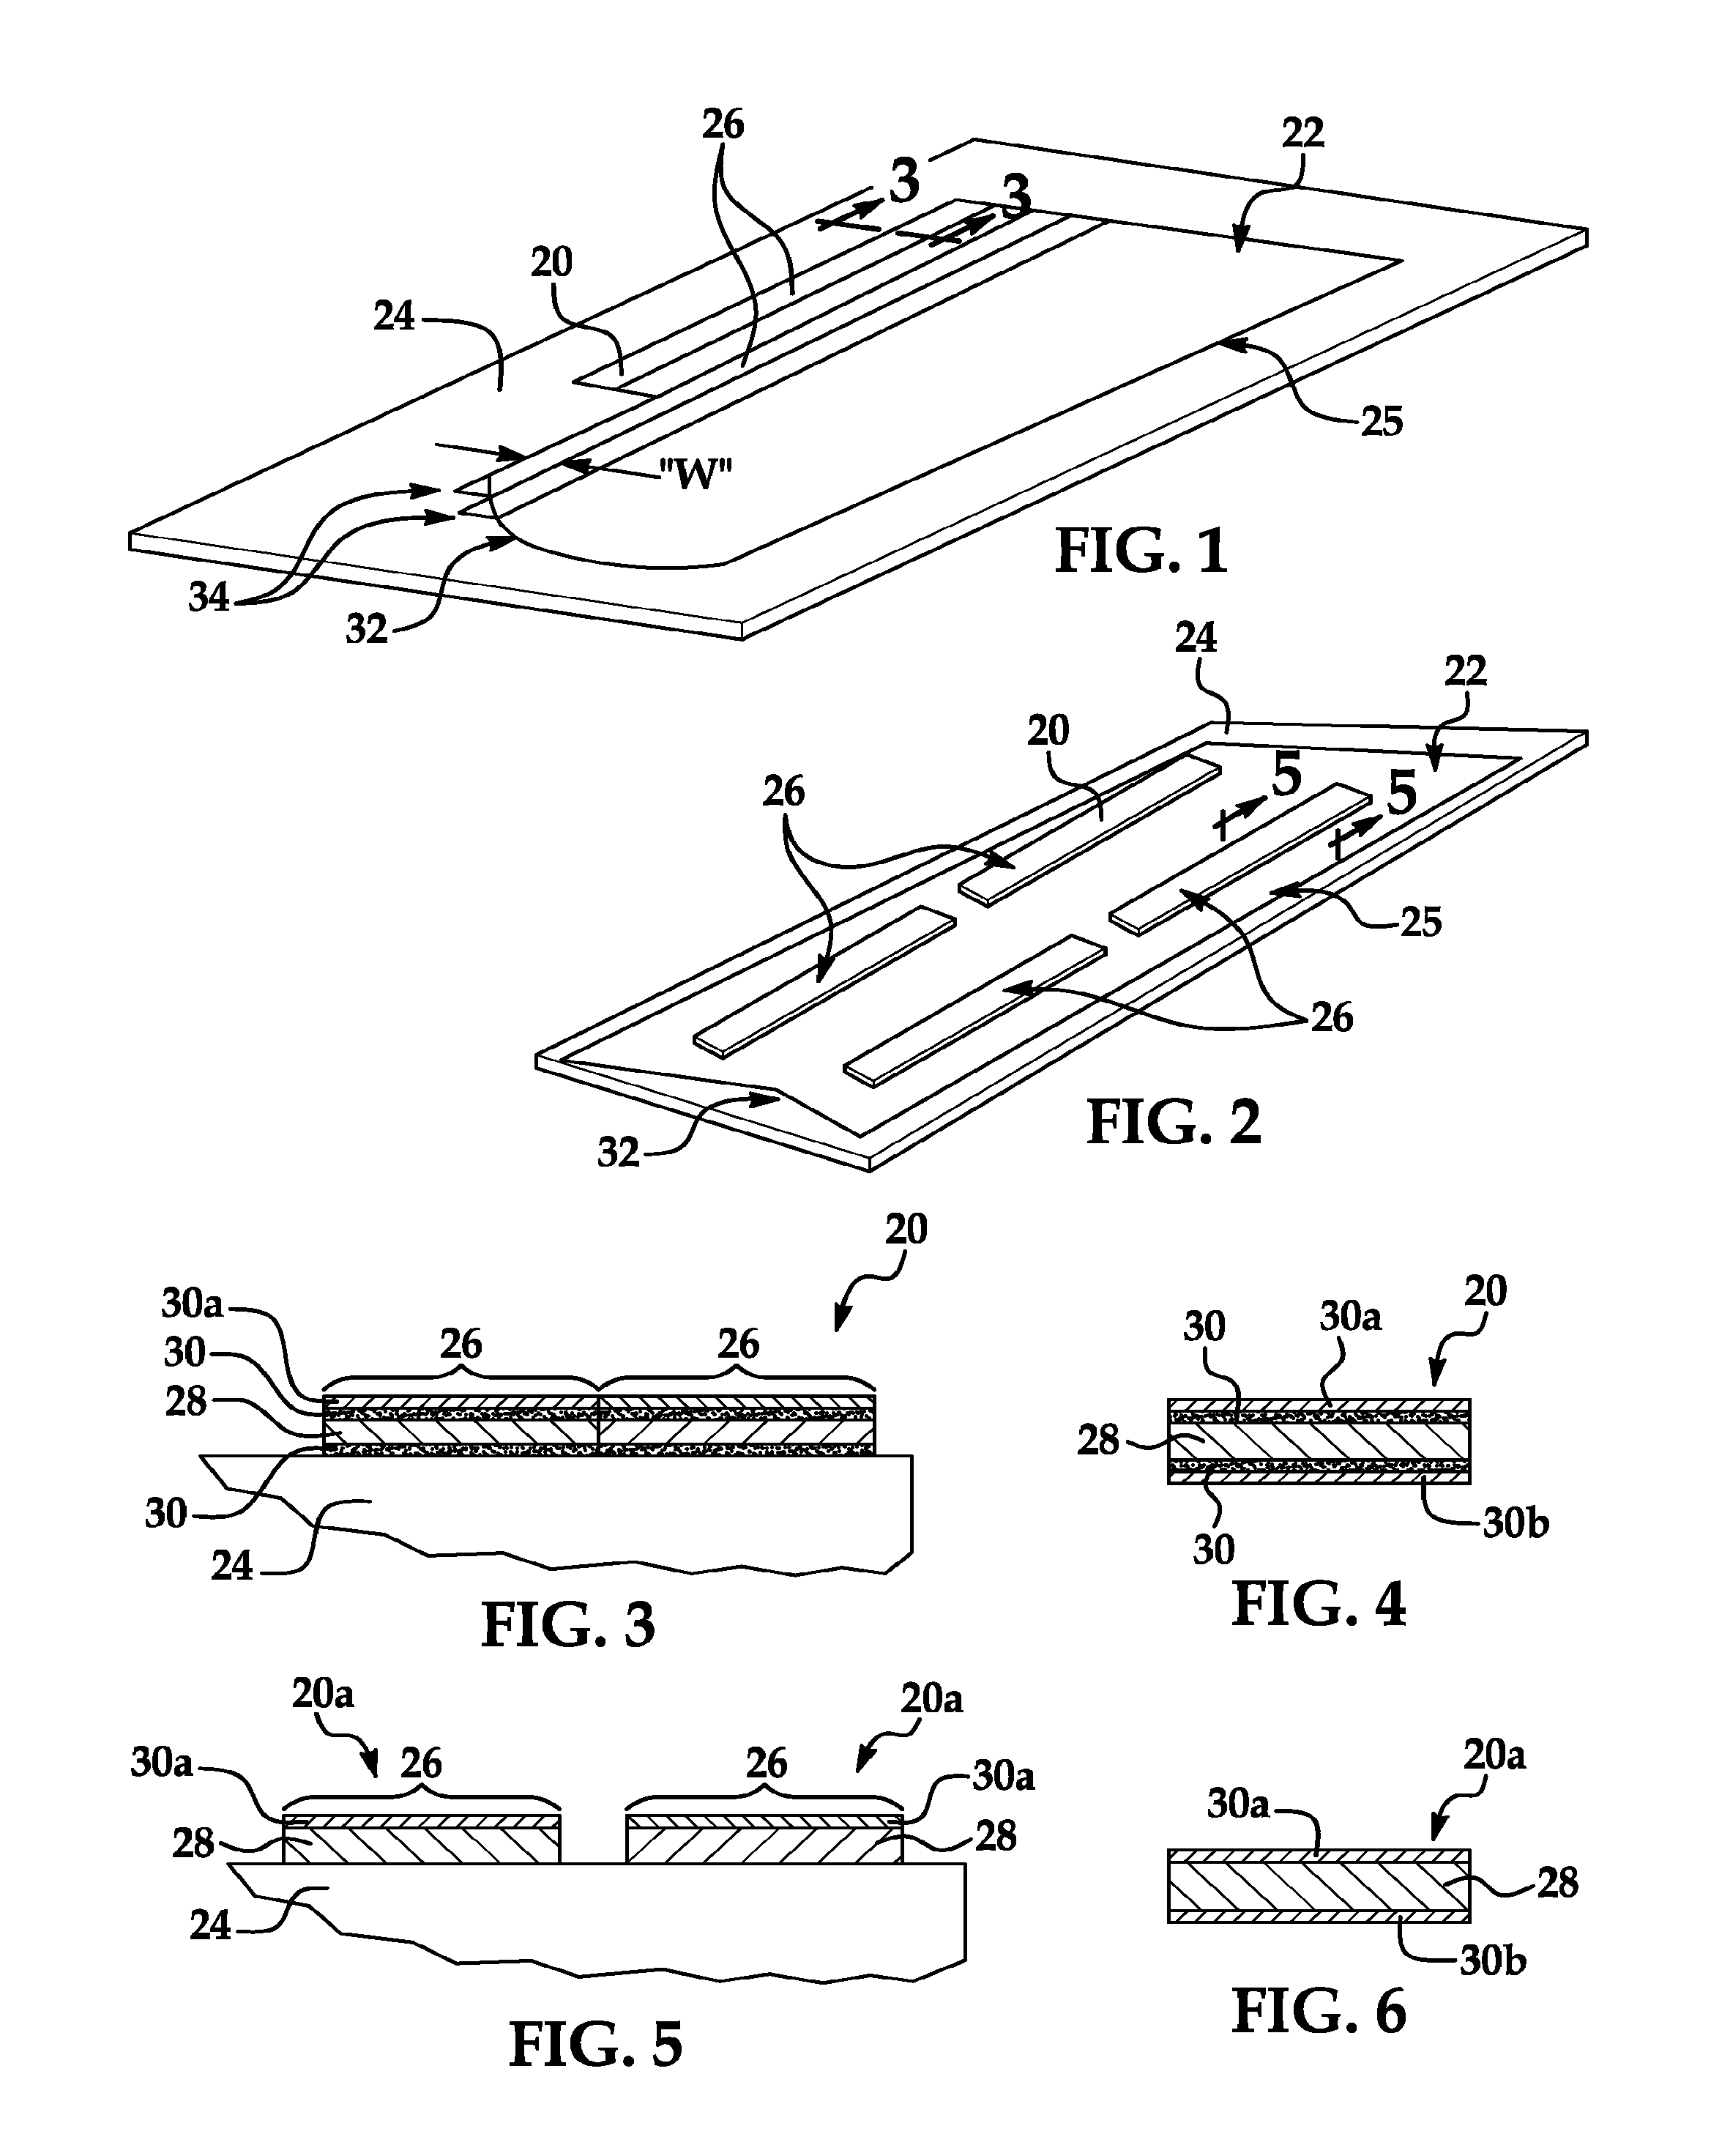 Automated Placement of Vibration Damping Materials